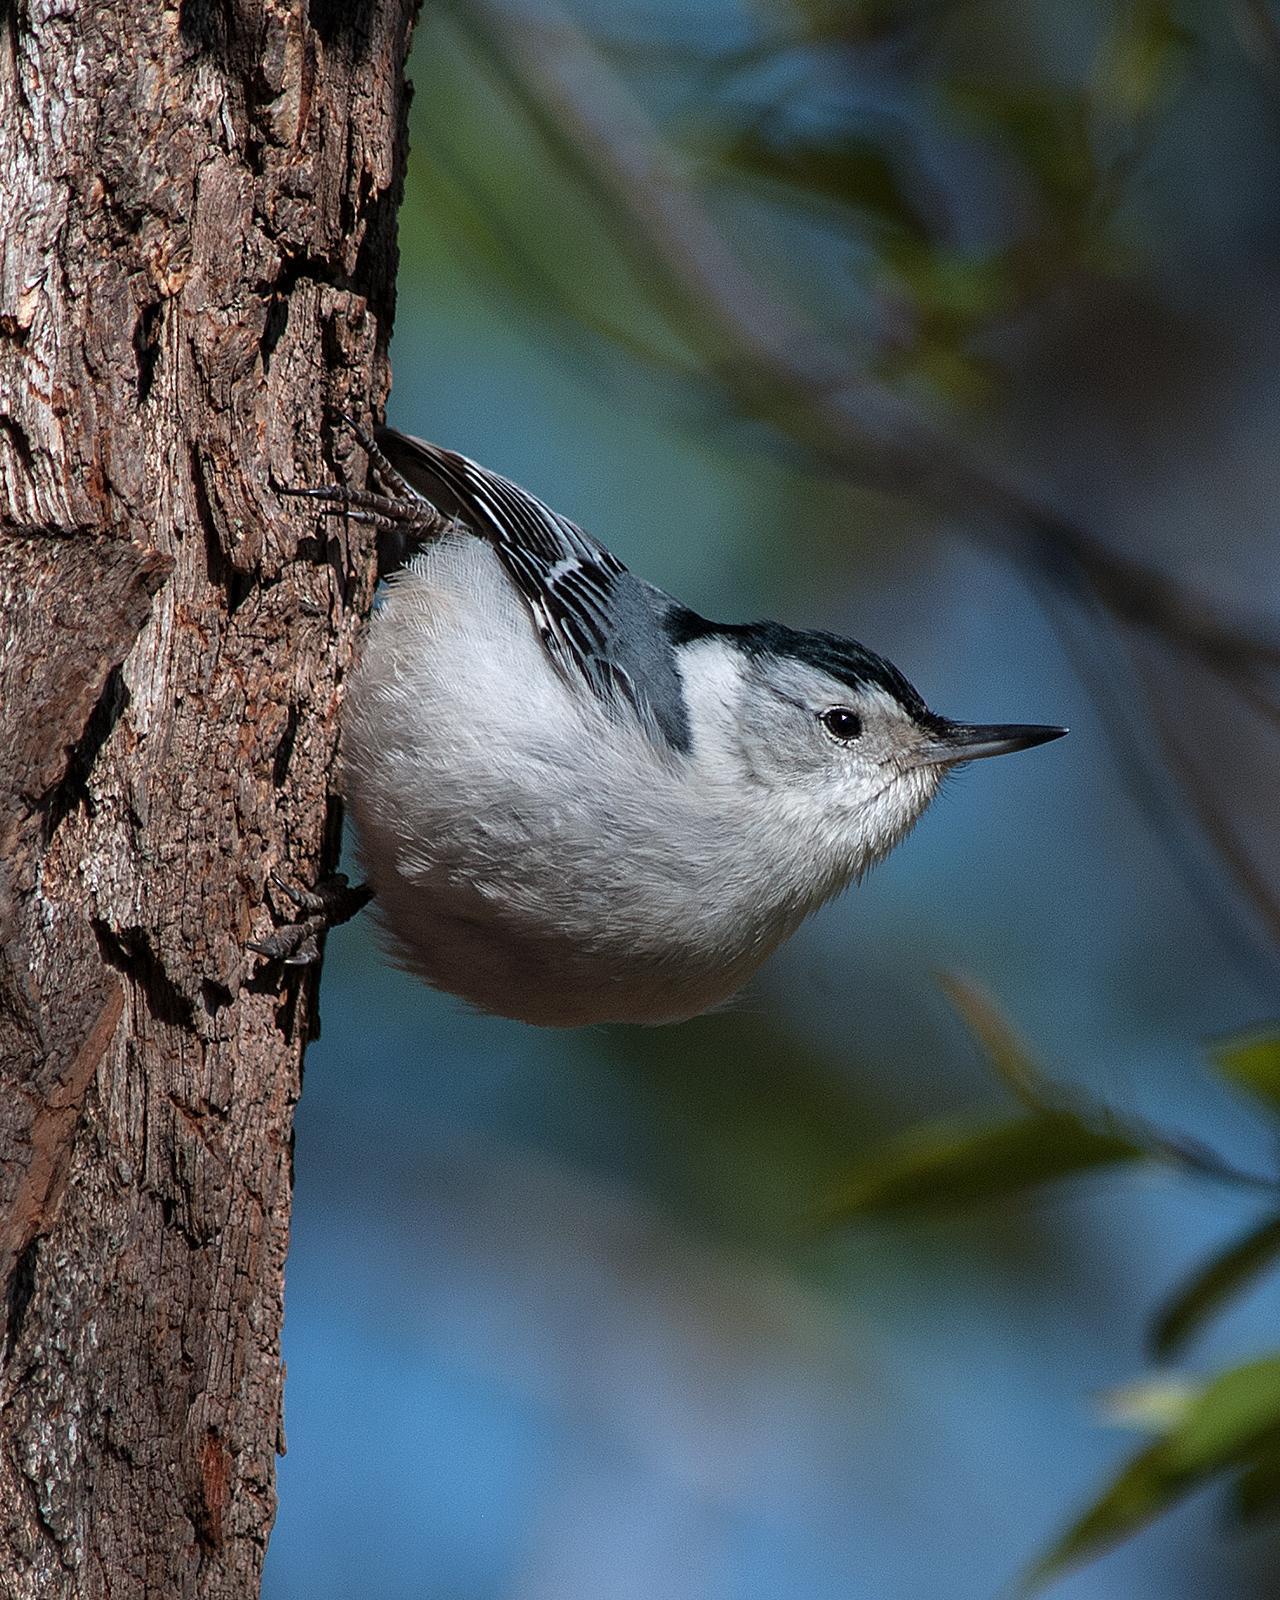 White-breasted Nuthatch Photo by Mark Blassage